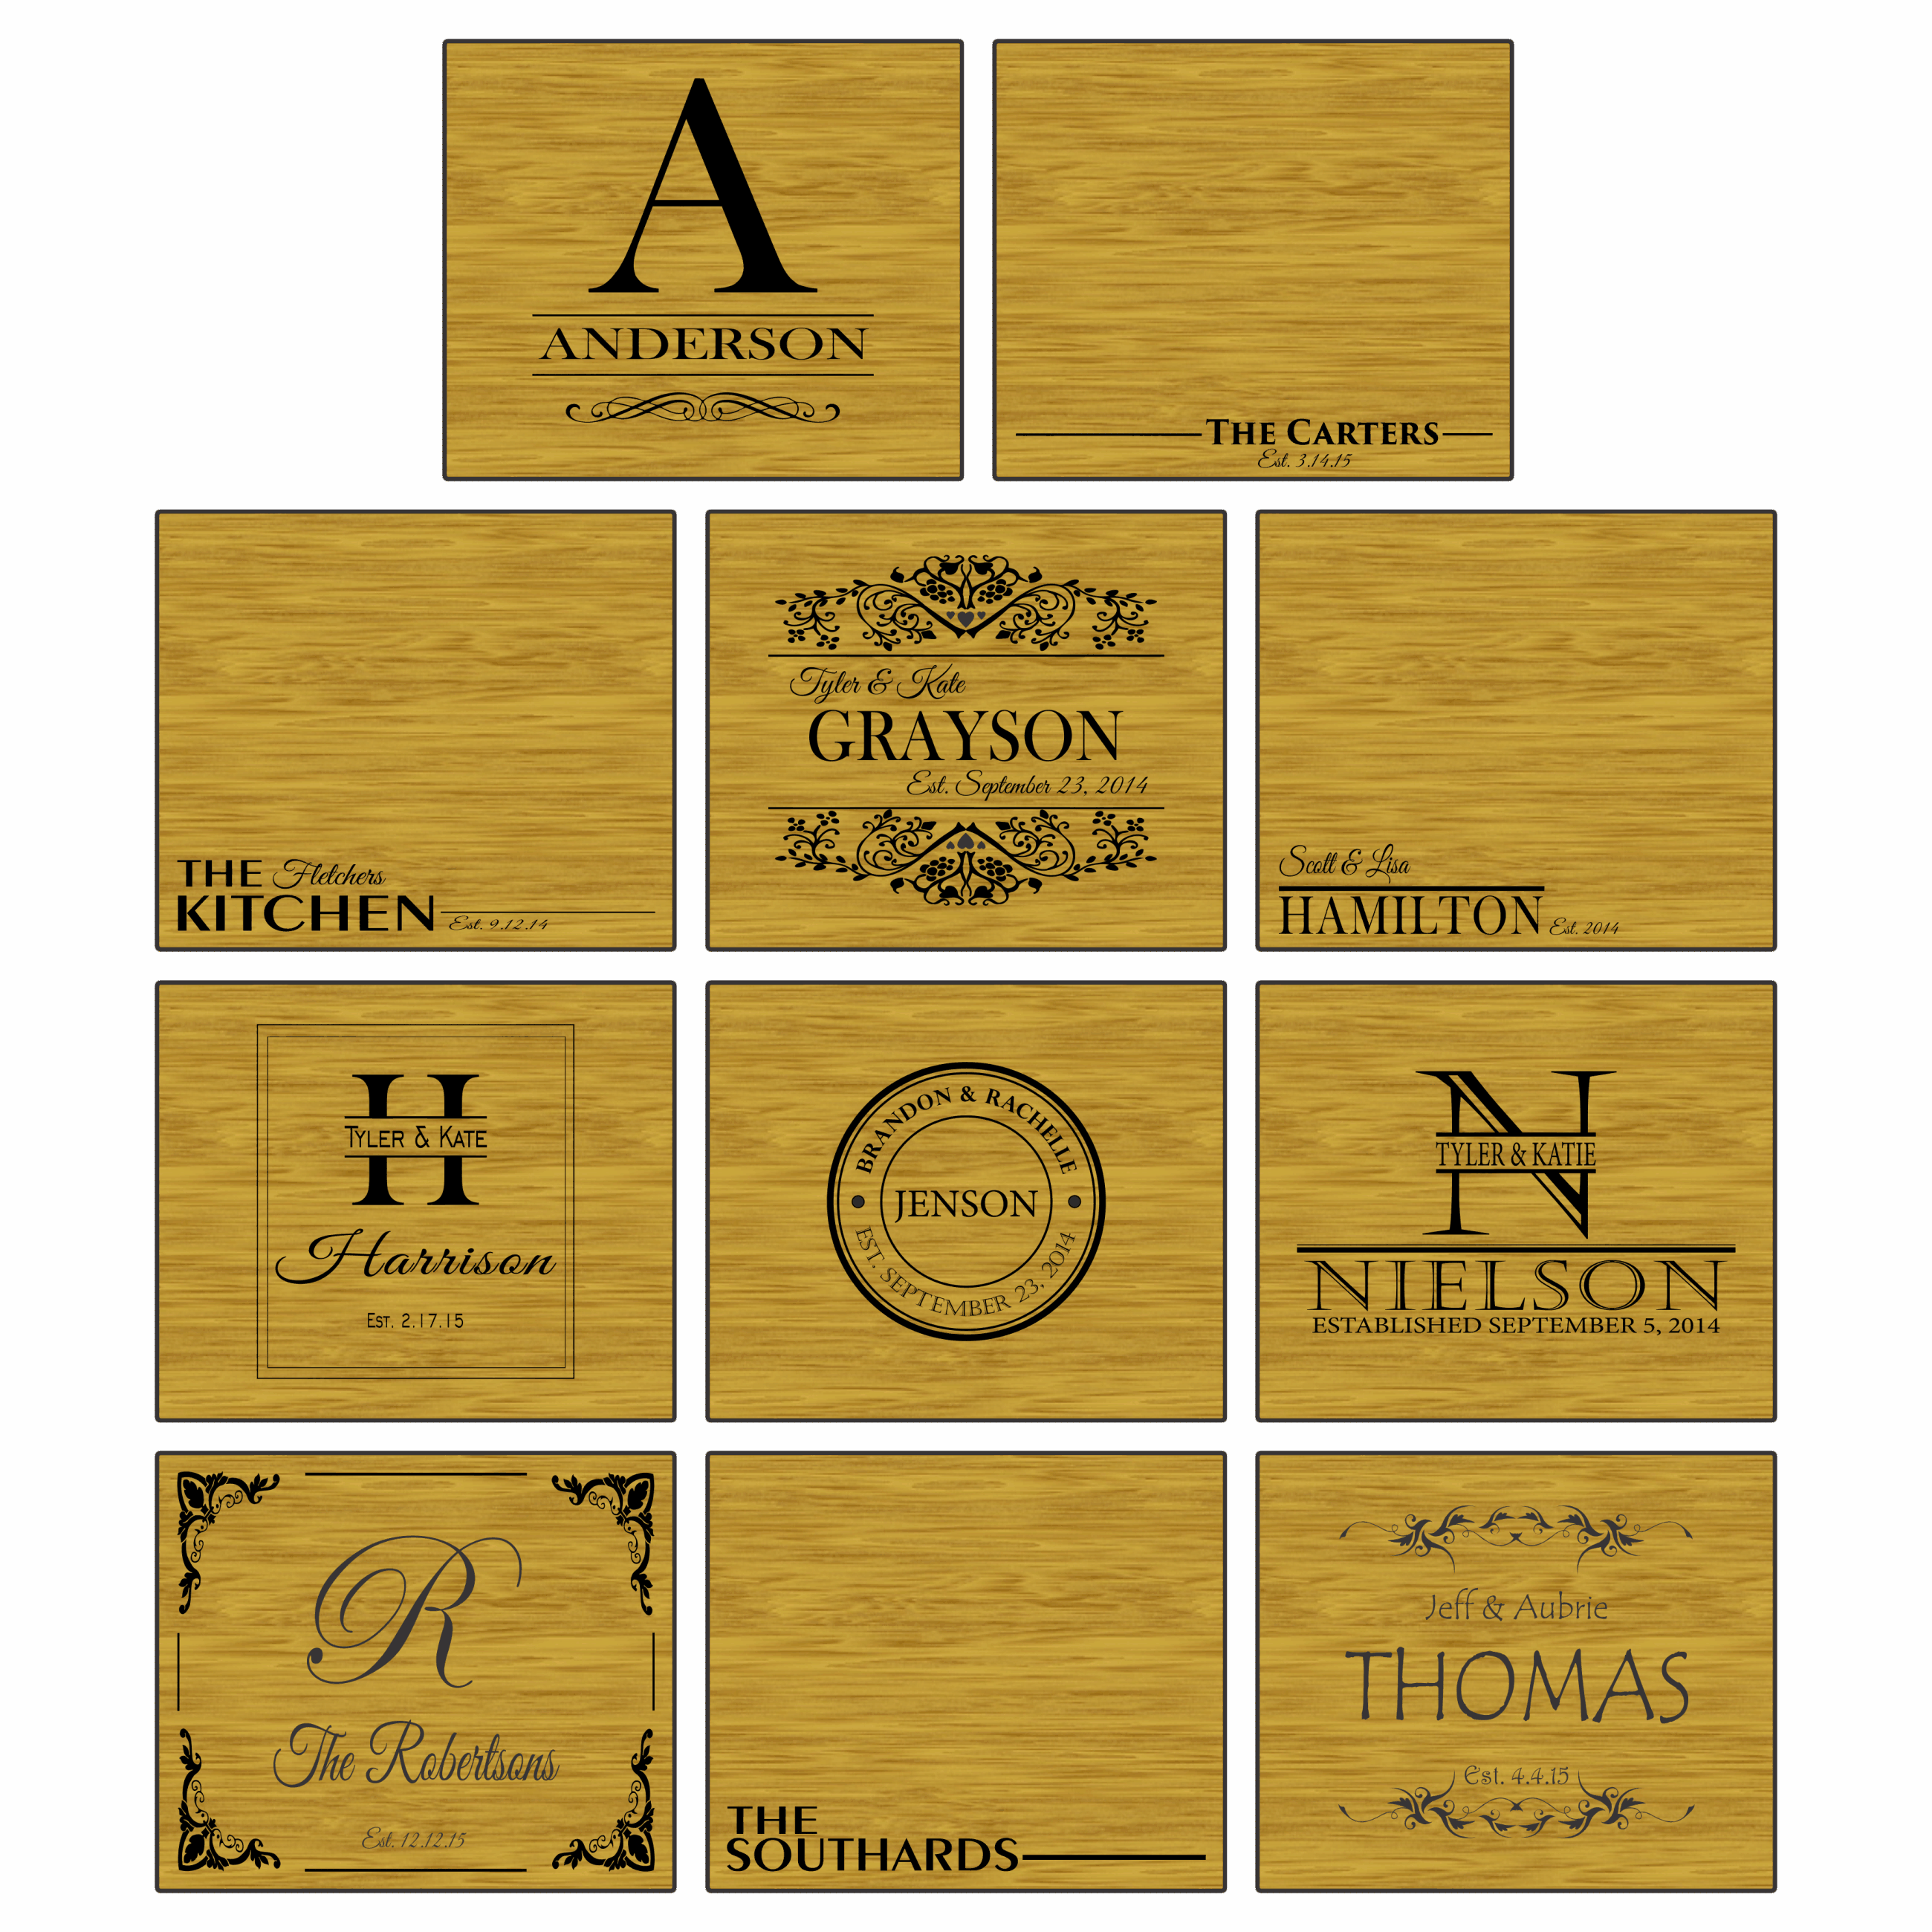 Personalized Large 11x13 Bamboo Cutting Board - Anderson